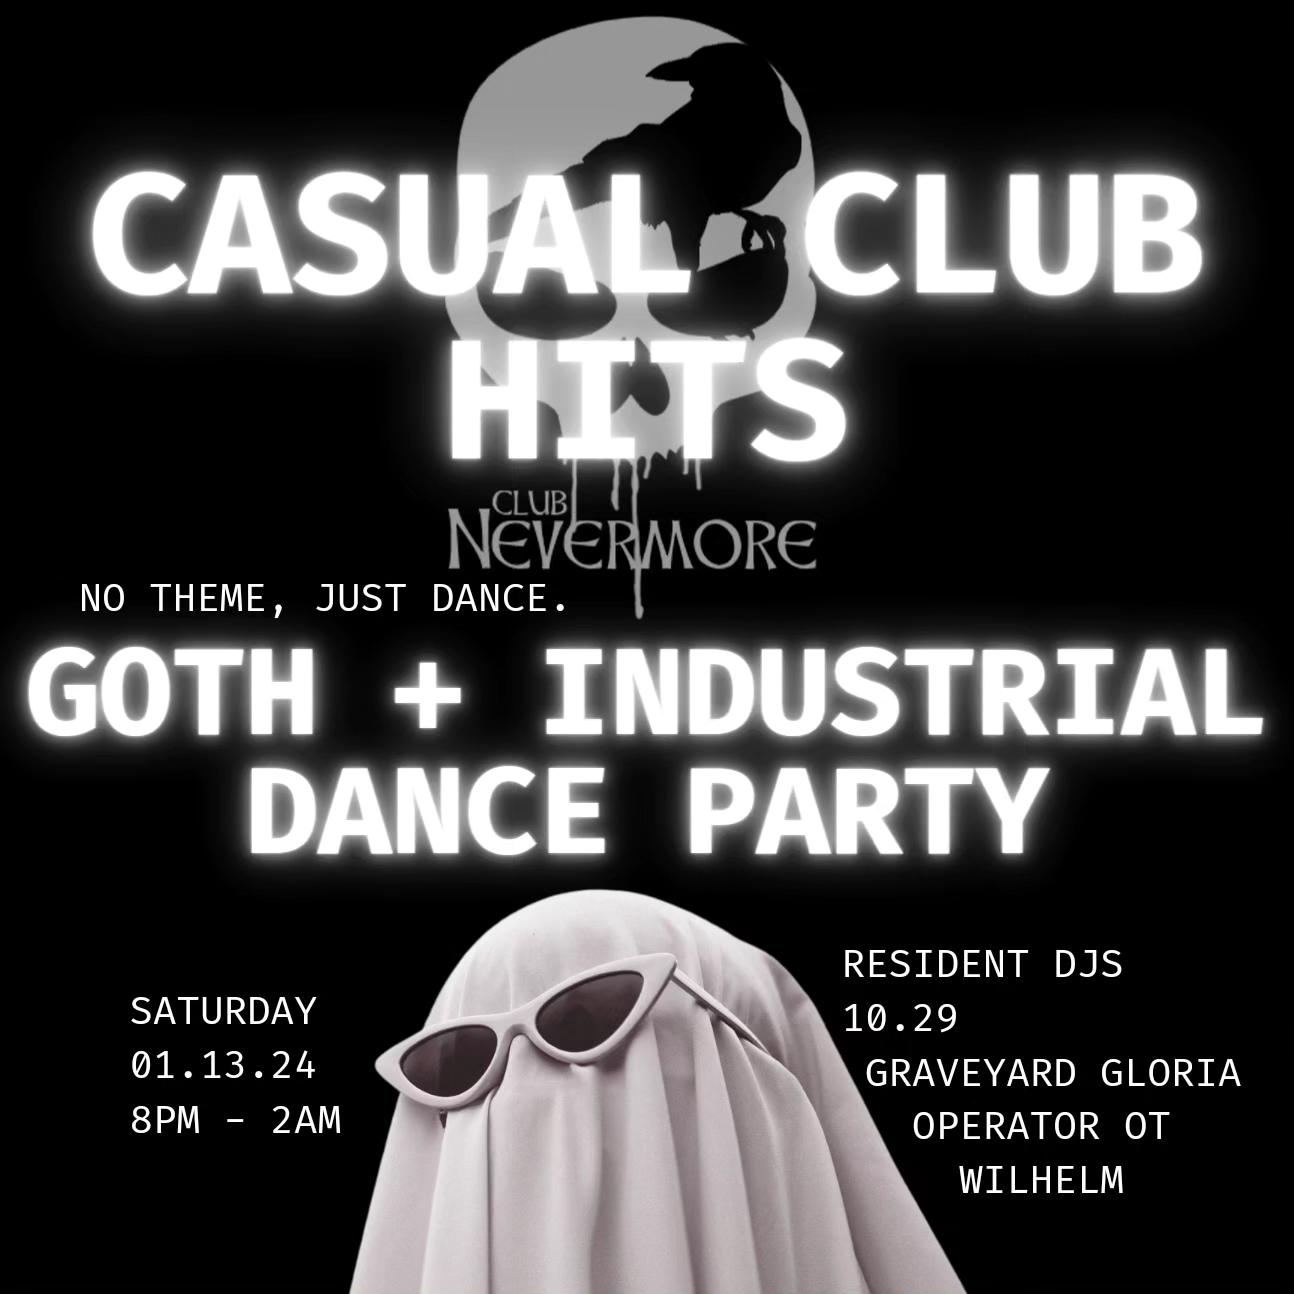 Flyer for Club Nevermore: Casual Club Hits. This shows the Club Nevermore logo, which is a skull with a raven inside of it, and below that there is an image of a person covered in a sheet, to depict a ghost, with glasses on. The text reads, &ldquo;Club Nevermore. Goth and industrial dance party. Casual Club Hits. No theme, just dance. Saturday, January 13, 2024. 8 PM to 2 AM. With resident DJs DJ 10.29, DJ Graveyard Gloria, DJ Operator OT, and DJ Wilhelm. At The Labyrinth, 619 South Spring Street in Little Rock. Info on Club Nevermore membership at clubnevermore.com .&rdquo;